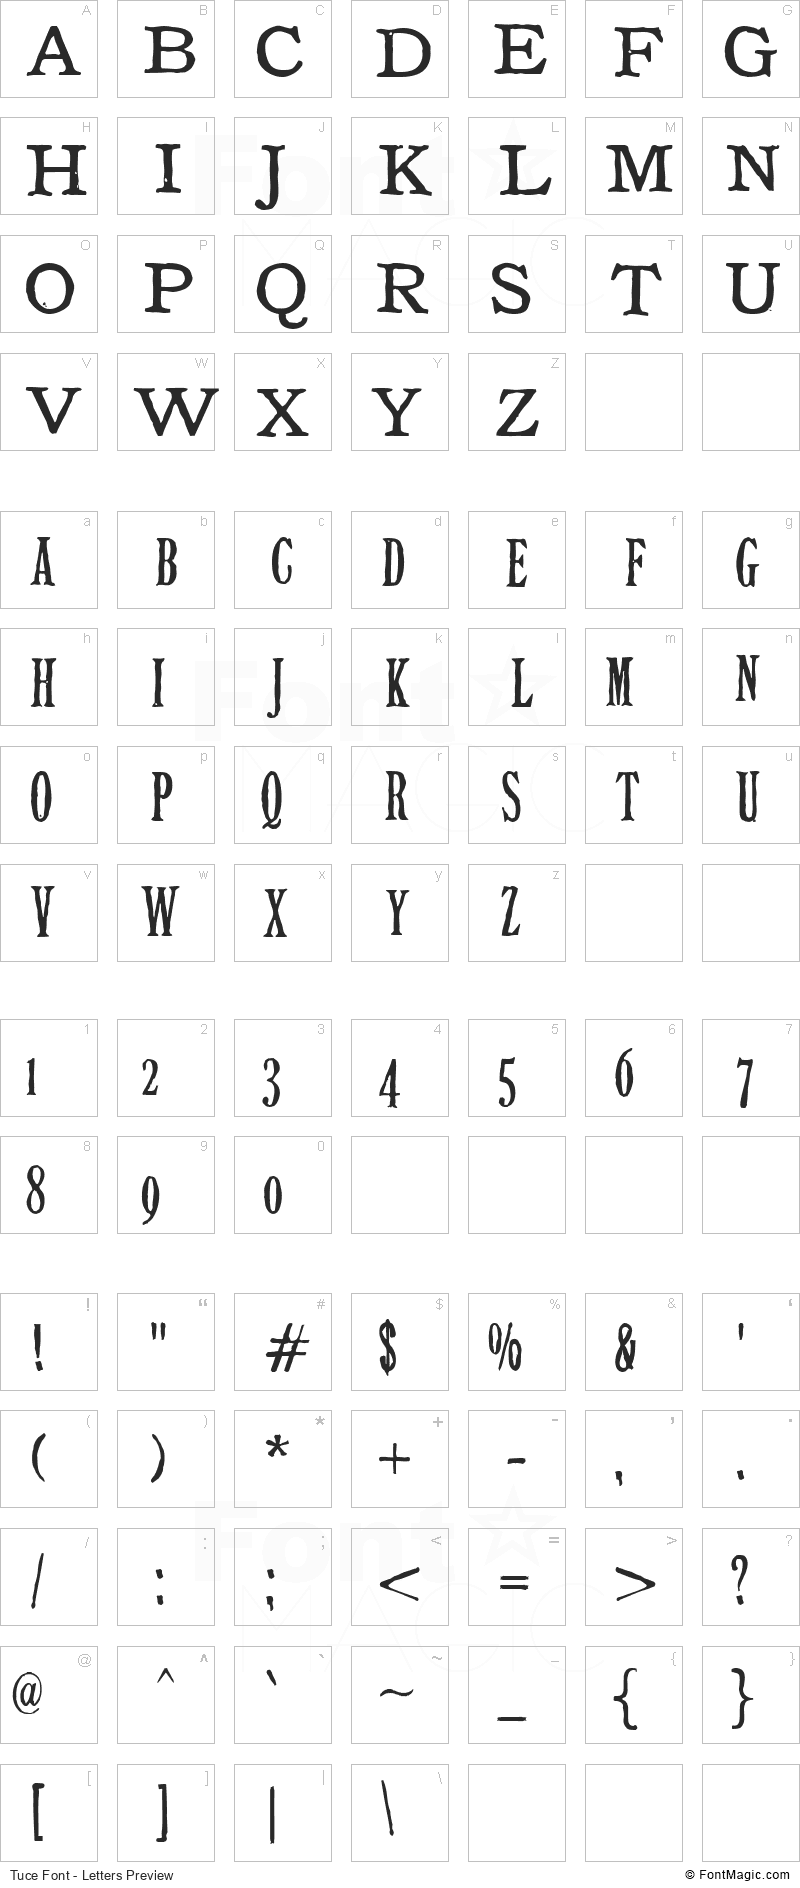 Tuce Font - All Latters Preview Chart